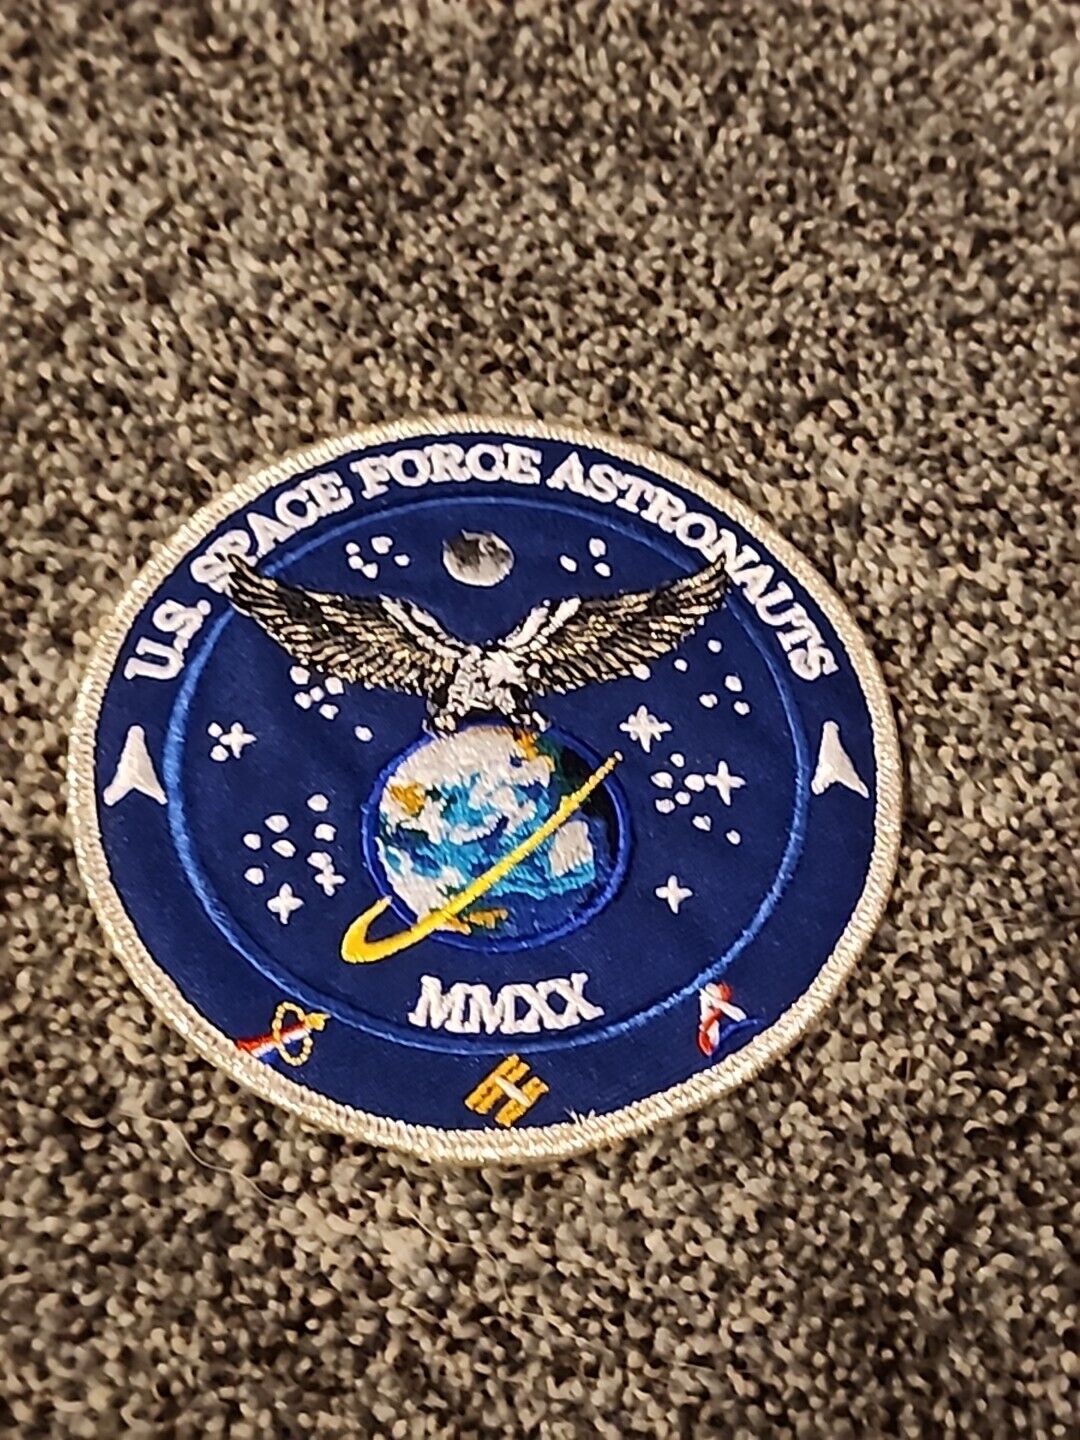 Authentic US SPACE FORCE ASTRONAUTS TIM GAGNON NASA SPACEX USAF USSF 4.5\